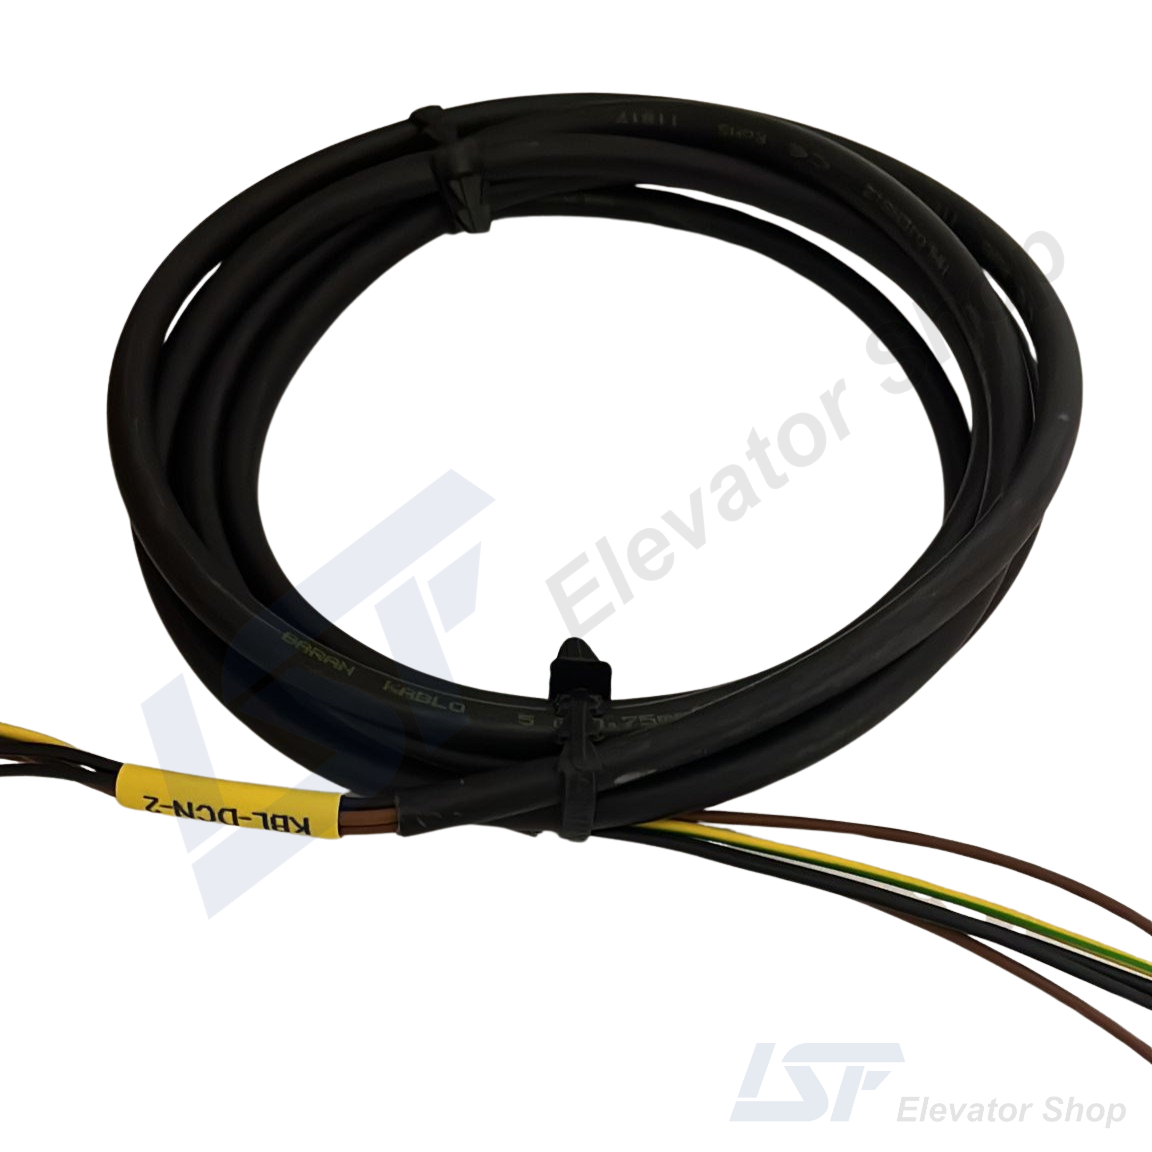 Arkel KBL-DCN2 Door Contacts Cable 3m. (Connection to Landing Door) for Elevator COntrol Panels